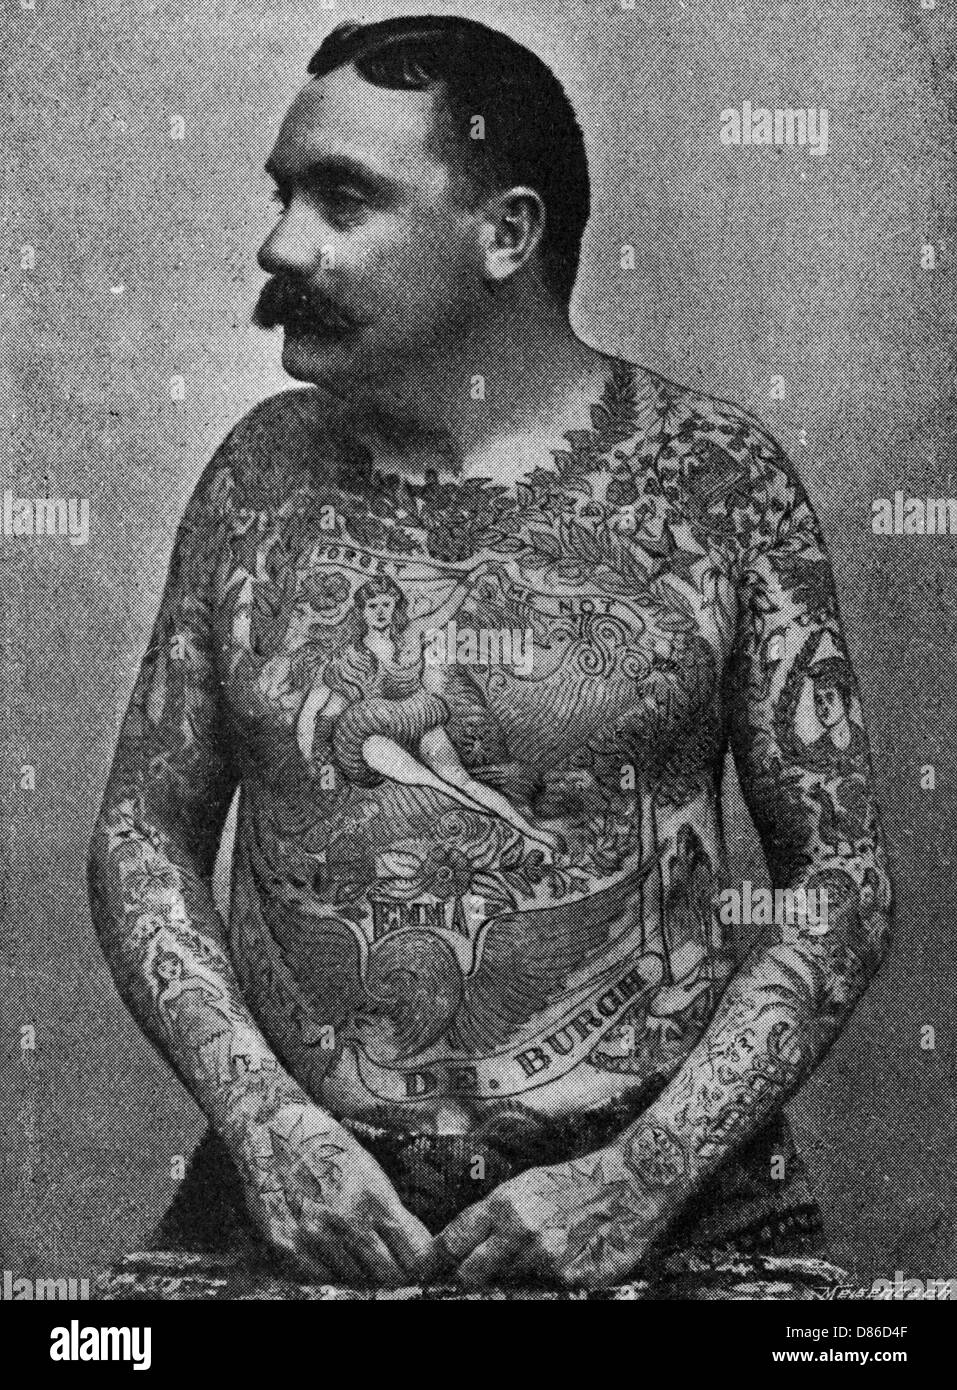 10 Facts About Tattoos You May Not Know